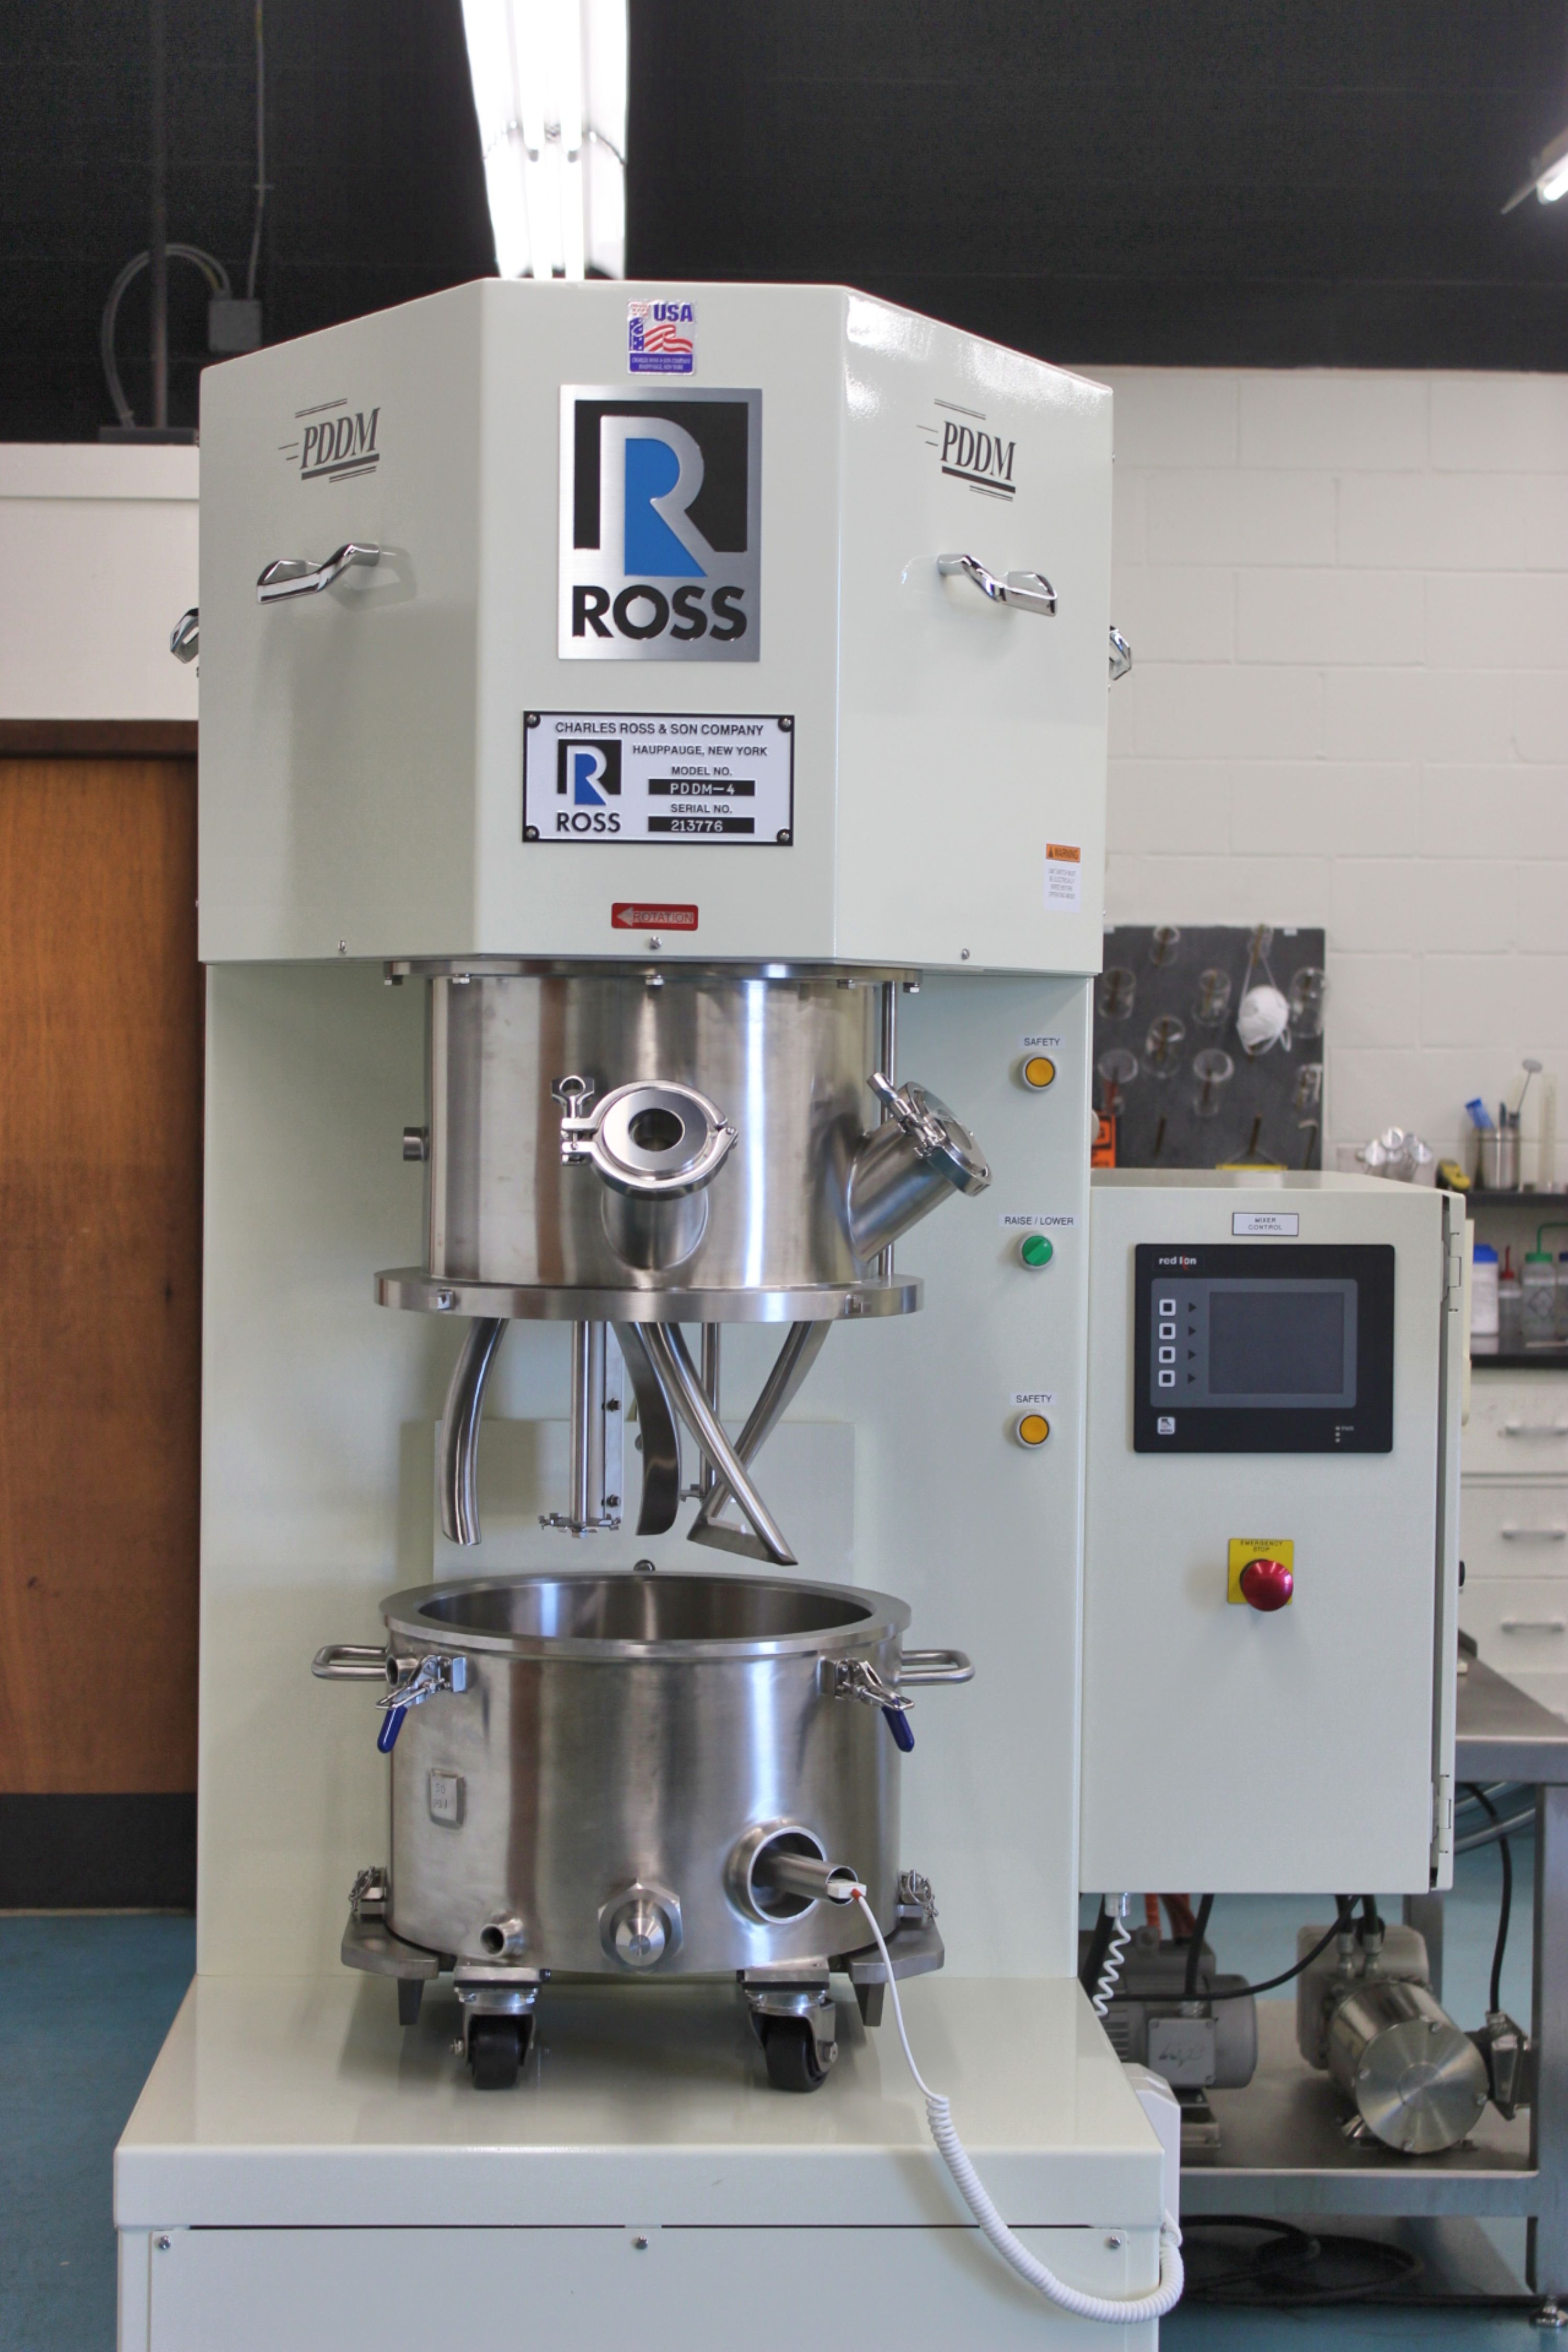 The four-gallon model PDDM-4 planetary dual disperser is equipped with two high viscosity blades and two high speed dispersers.